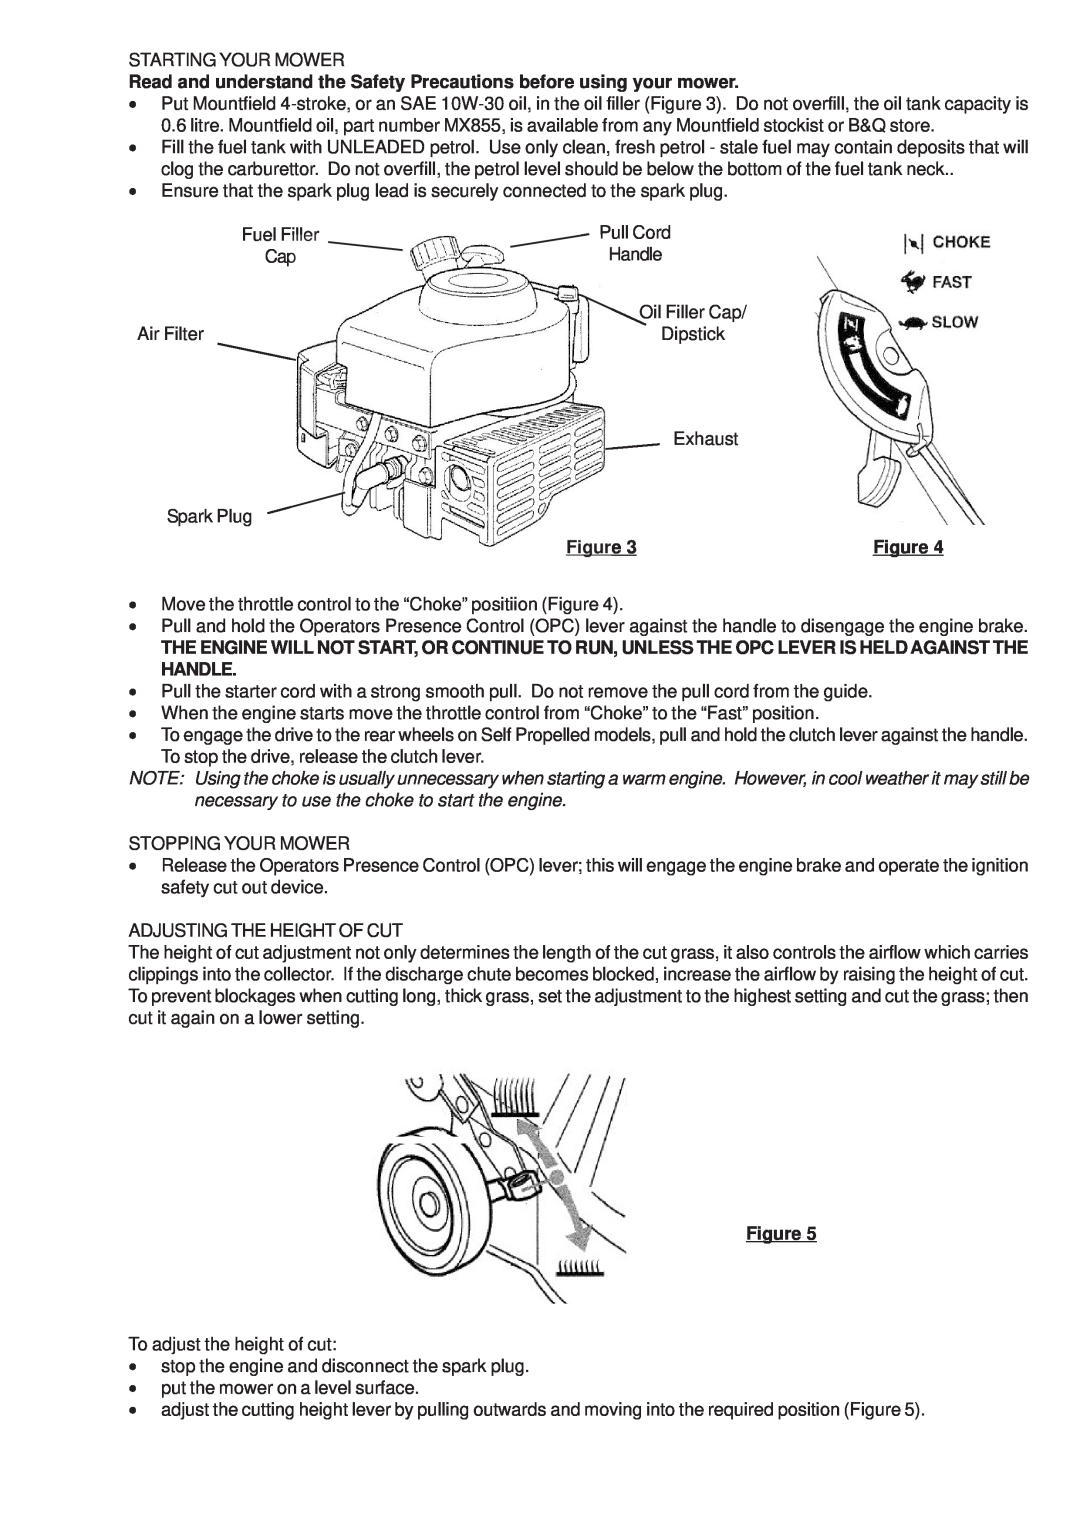 Homelite HL454HP manual Read and understand the Safety Precautions before using your mower 